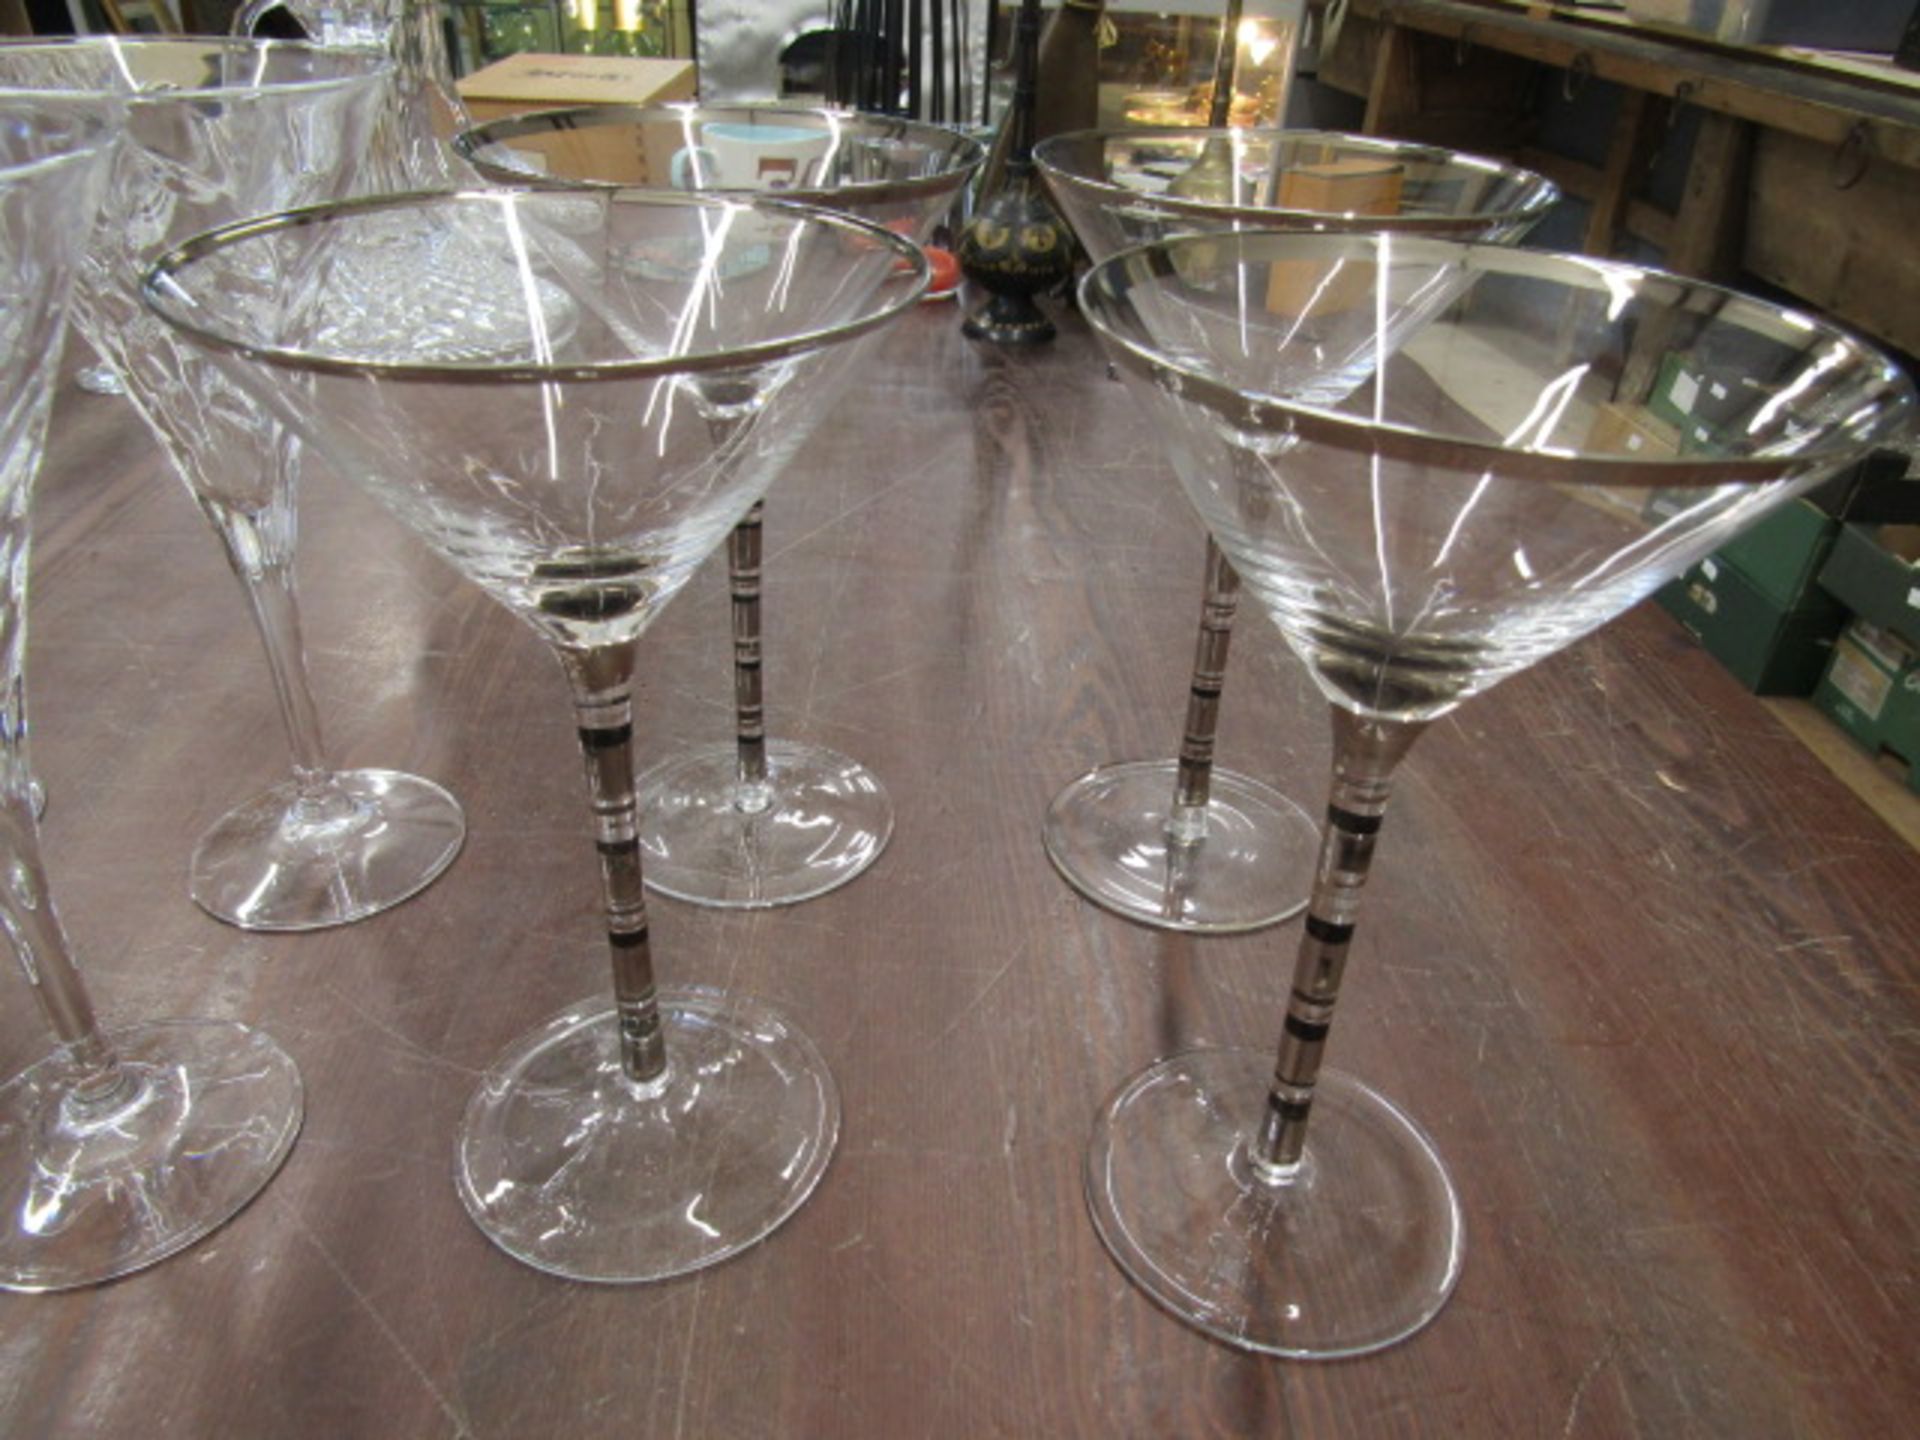 Wine glasses, cocktail, Babycham, cut glass- various glass ware, most good quality - Image 4 of 6